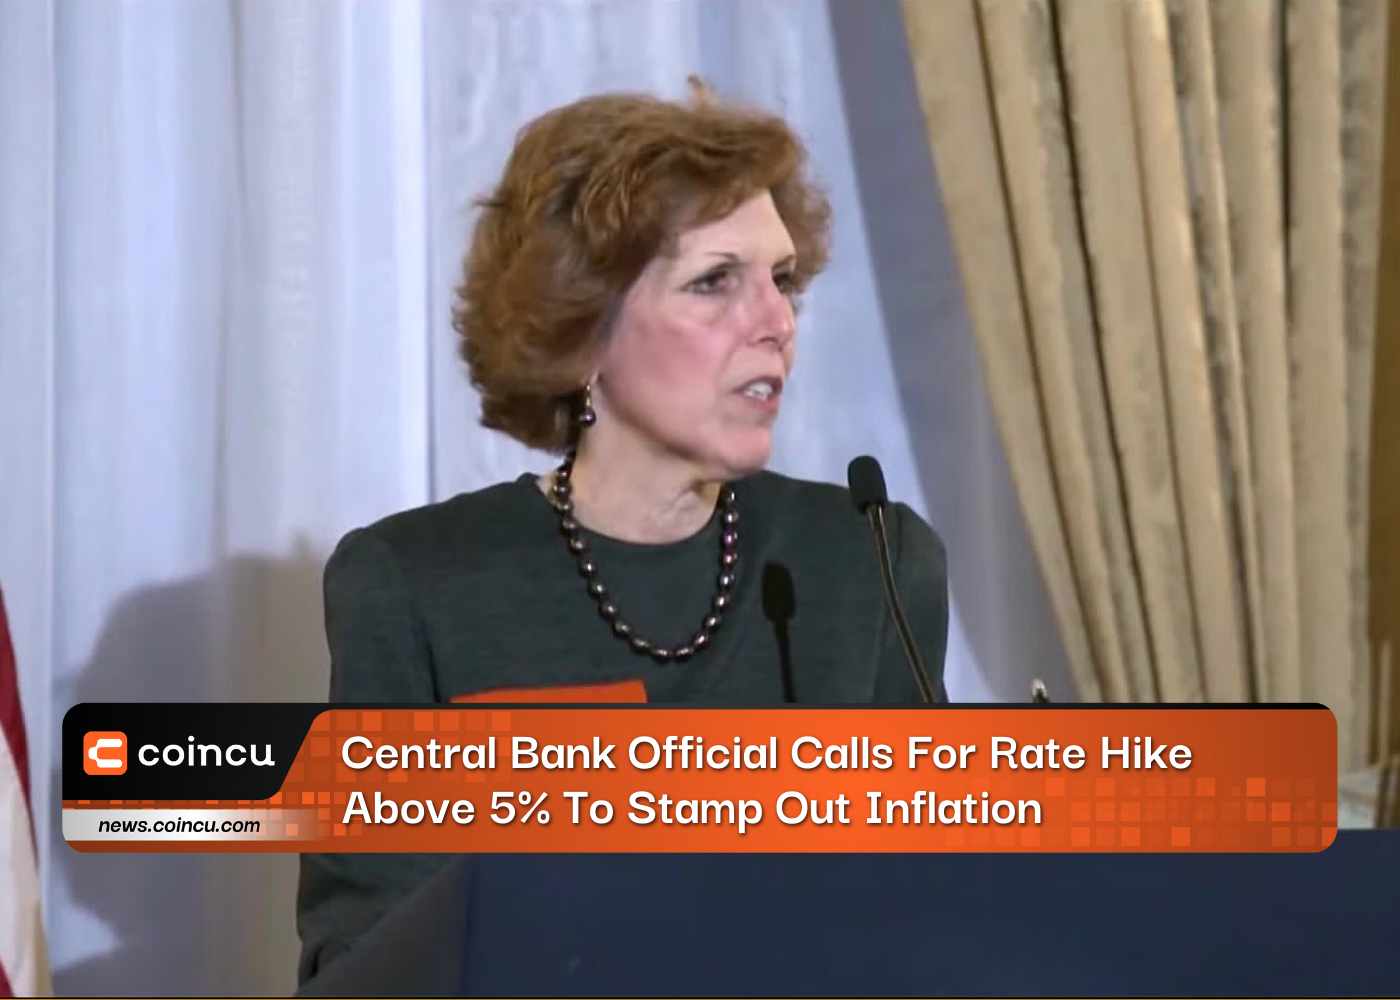 Central Bank Official Calls For Rate Hike Above 5% To Stamp Out Inflation